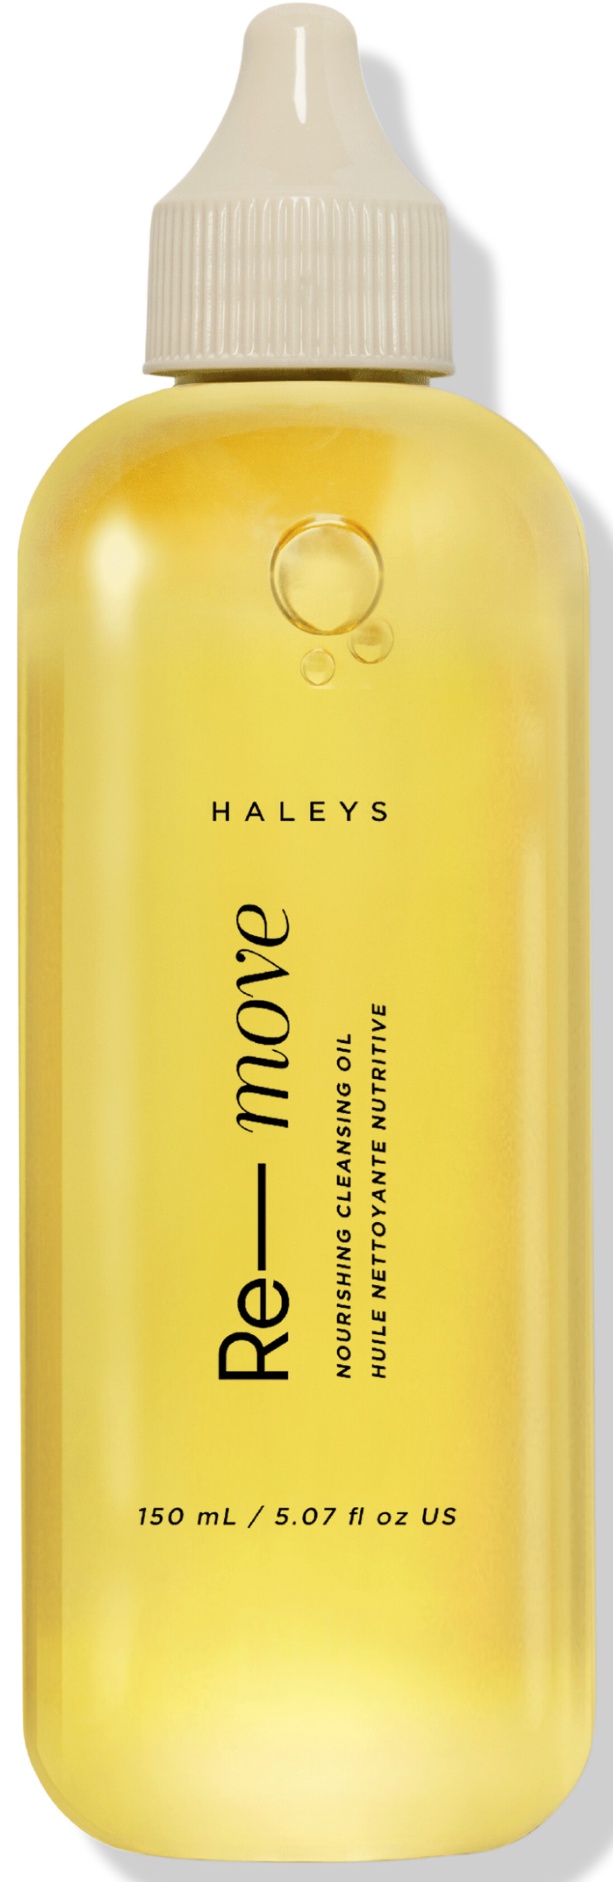 HALEYS Re-move Nourishing Cleansing Oil